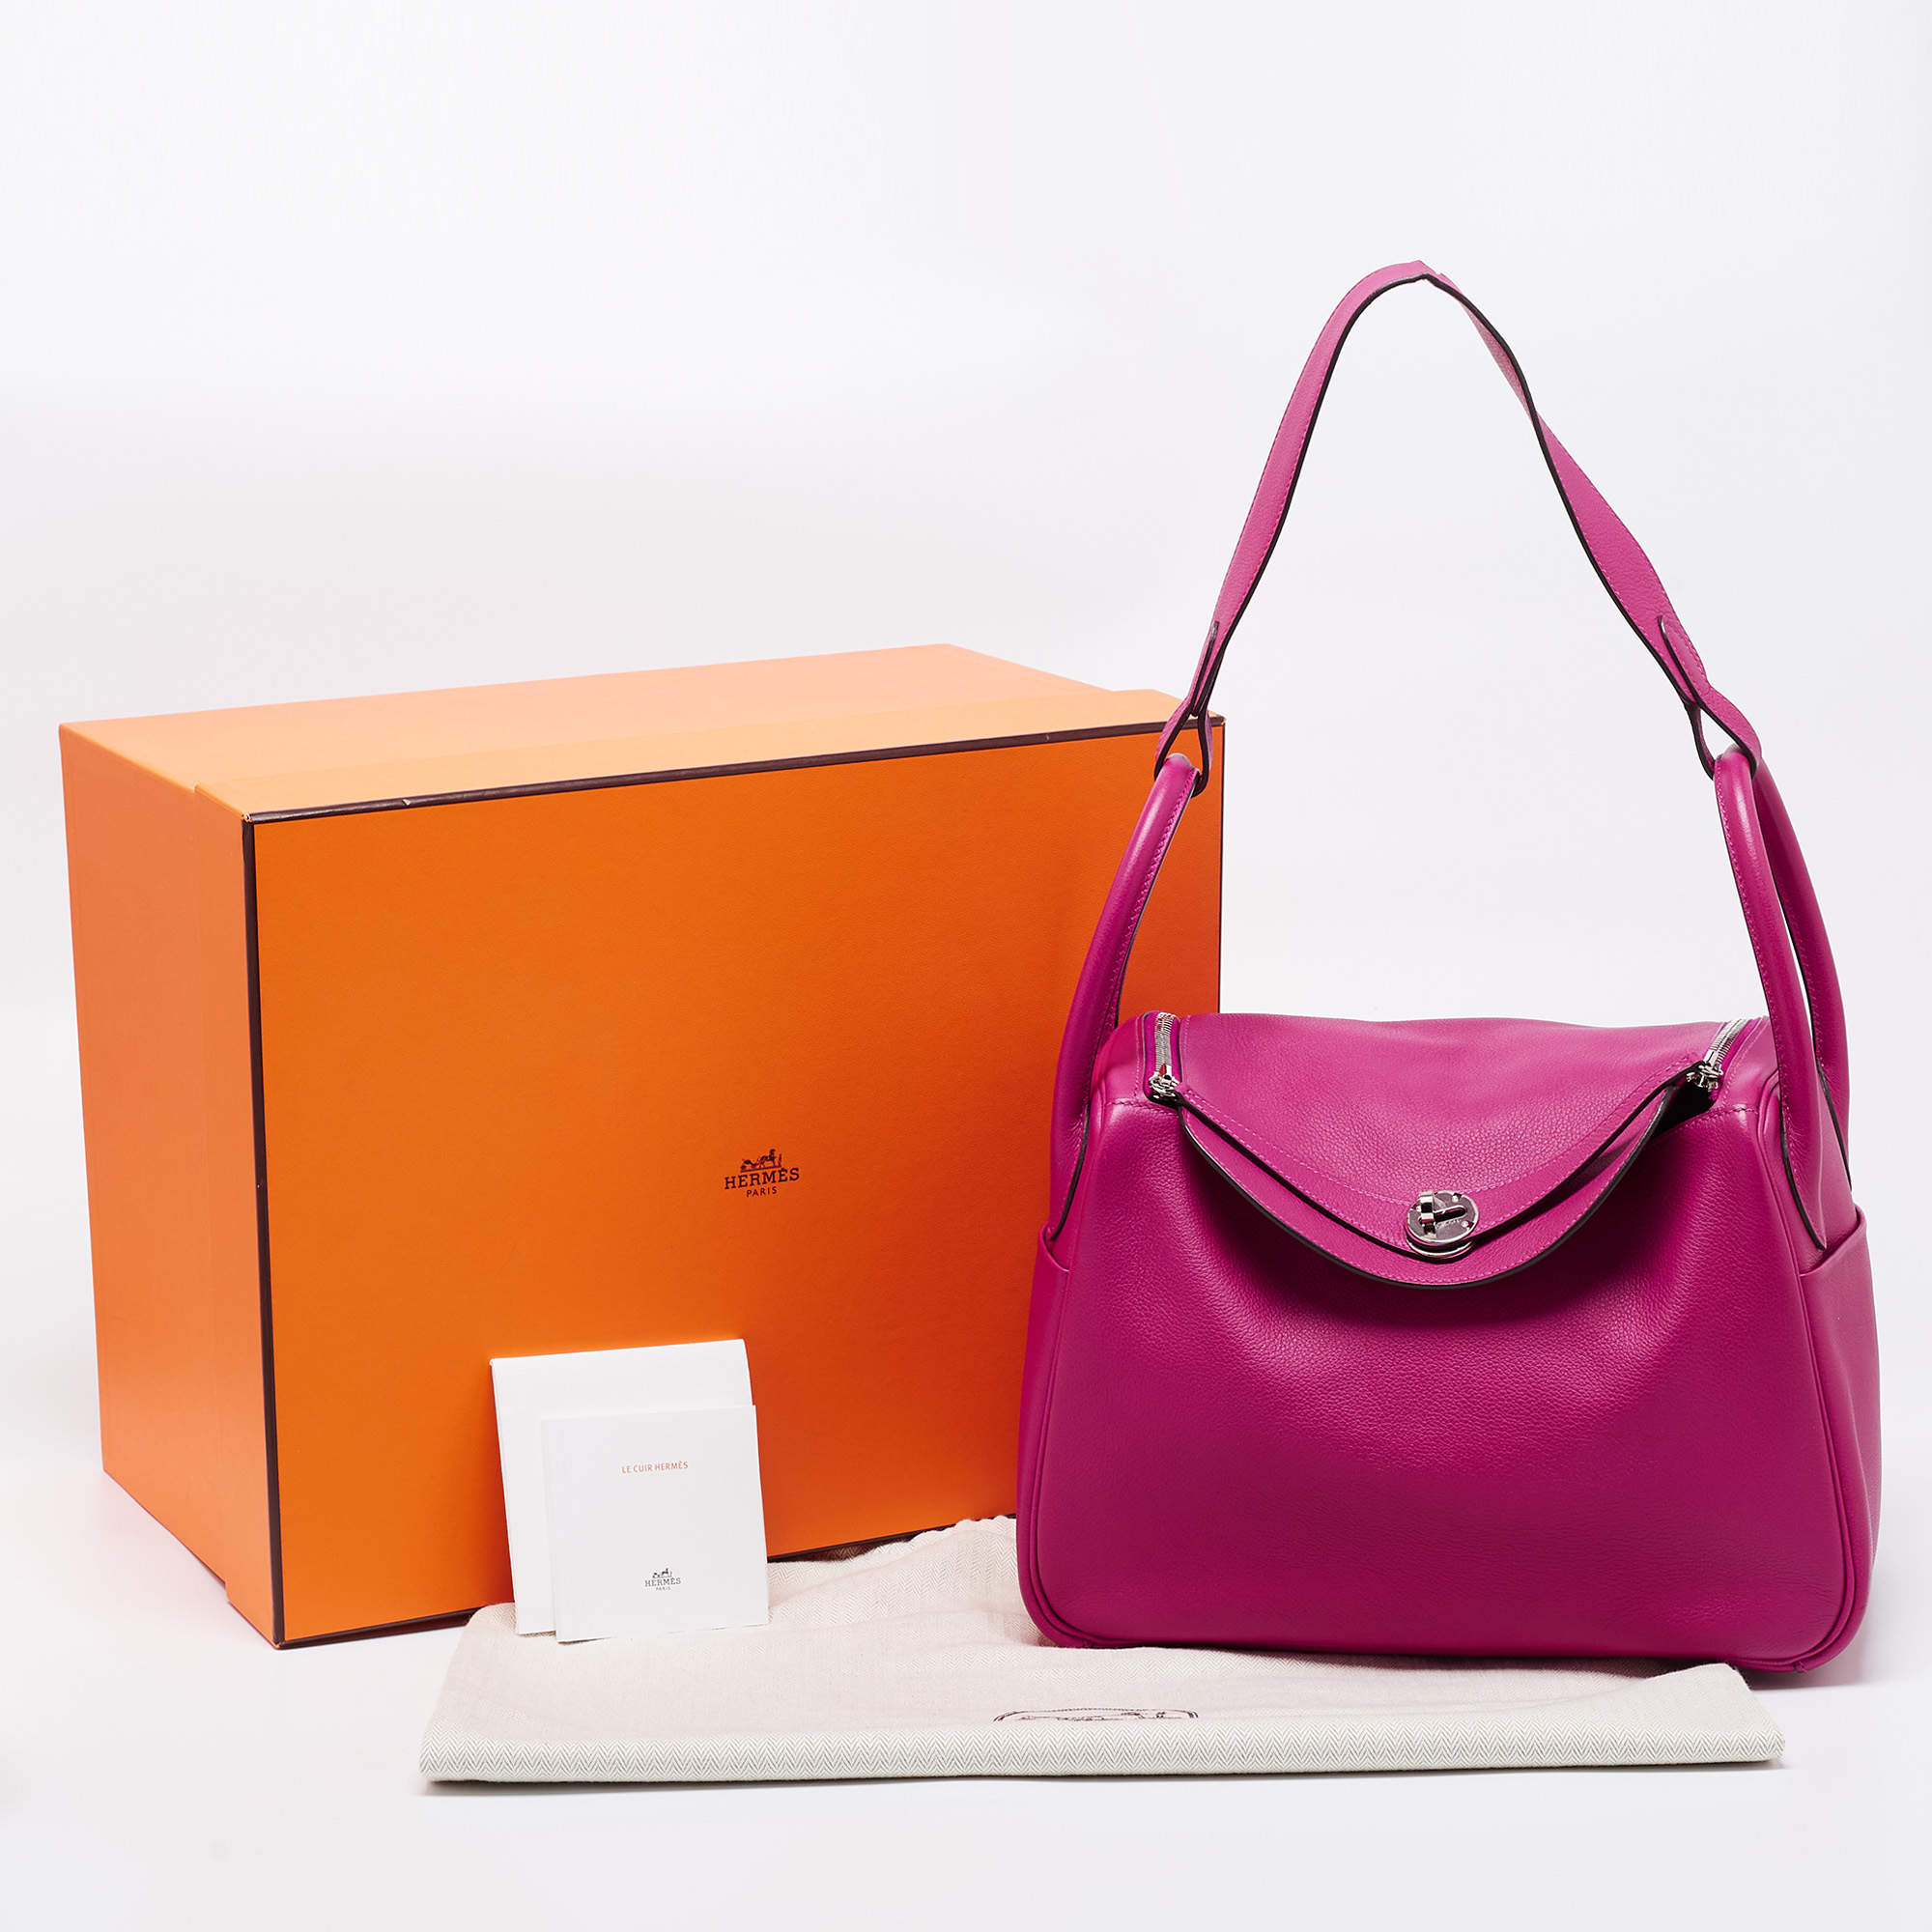 Hermes Lindy 30 in Rose Dragee - Selectionne PH